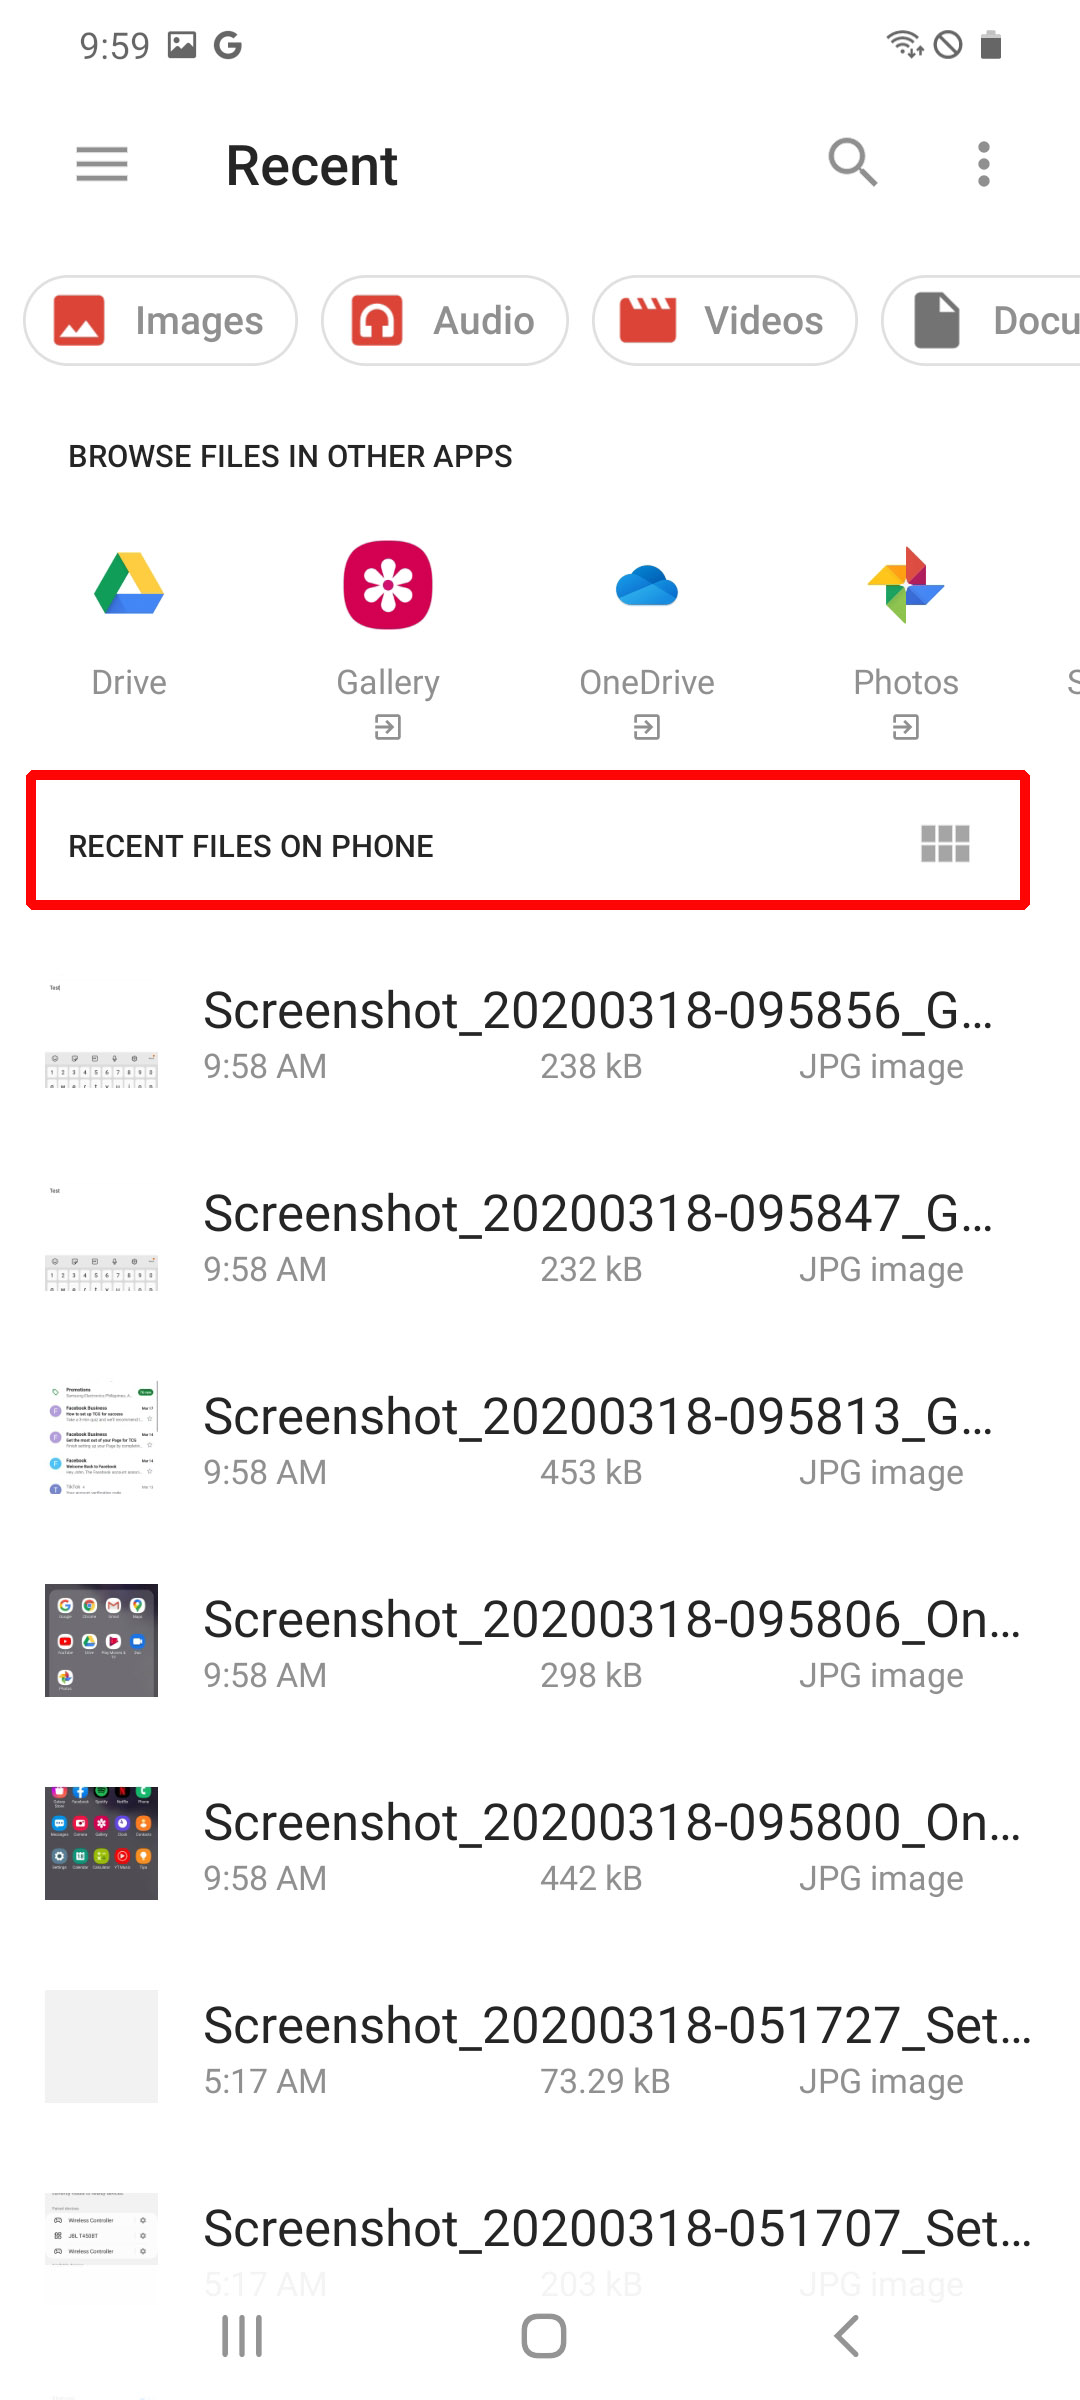 send email with attachment on galaxy s20 - select file attachment